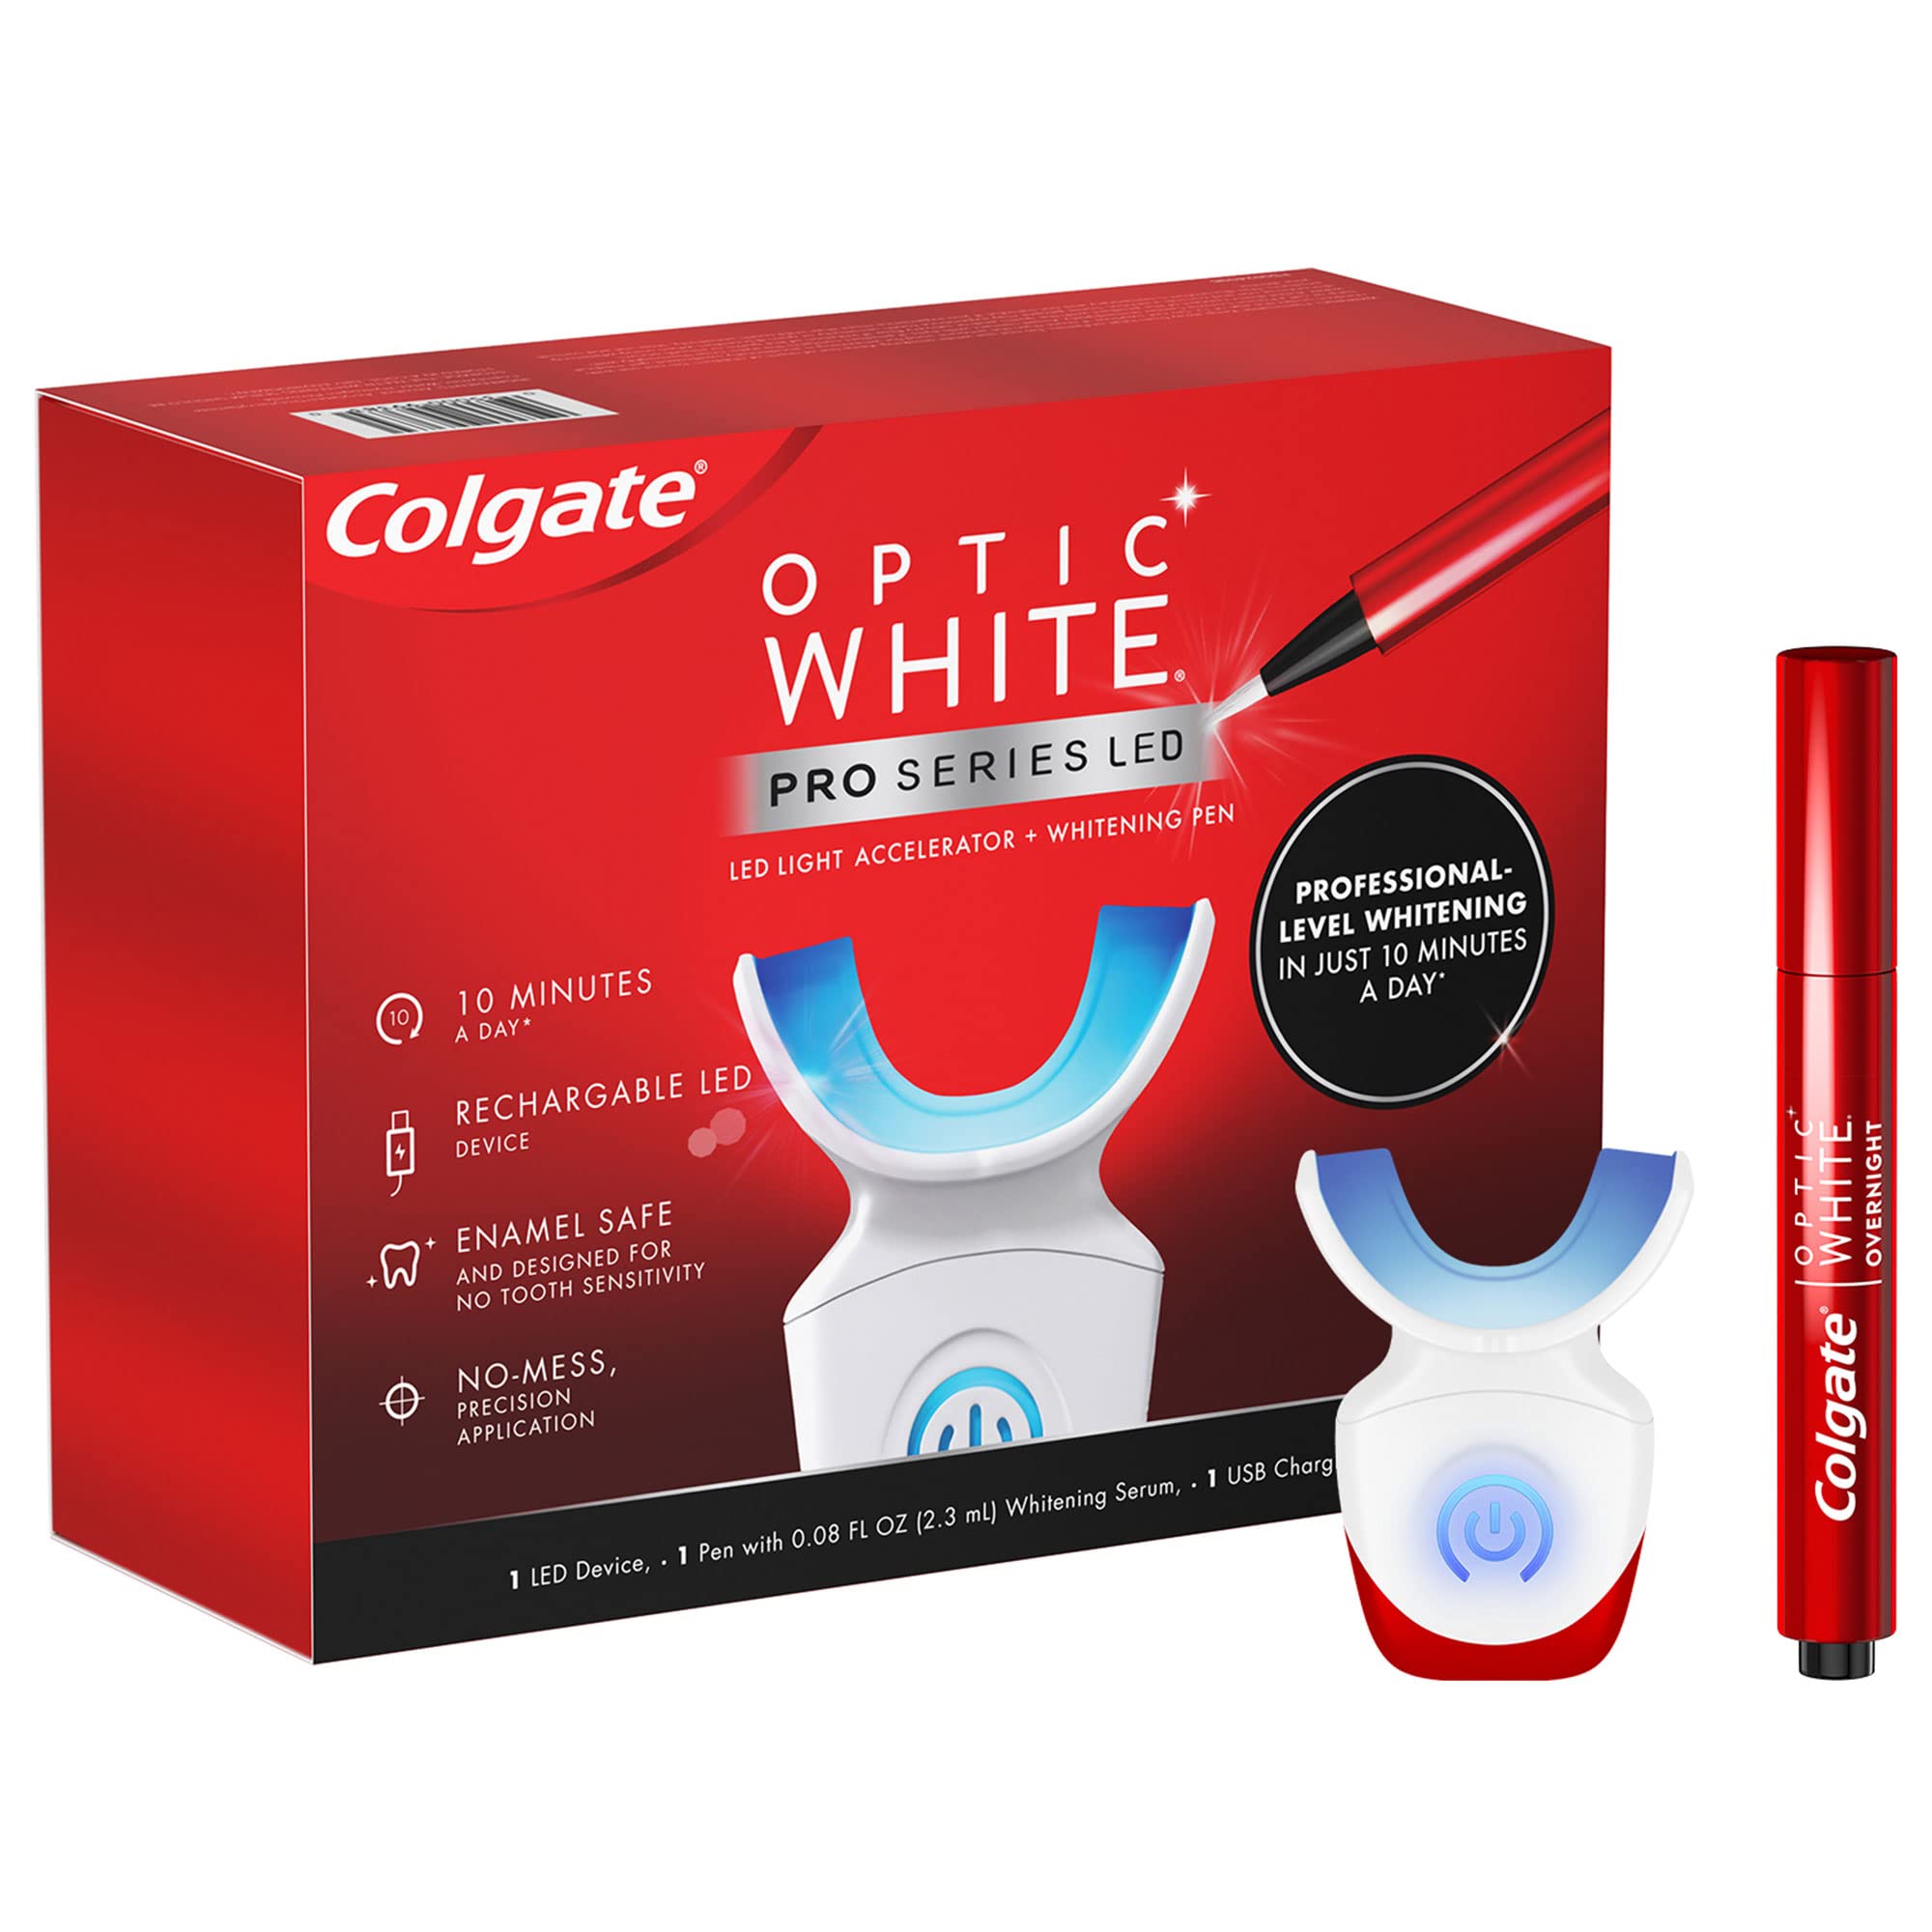 Max White Ultimate Renewal Toothpaste